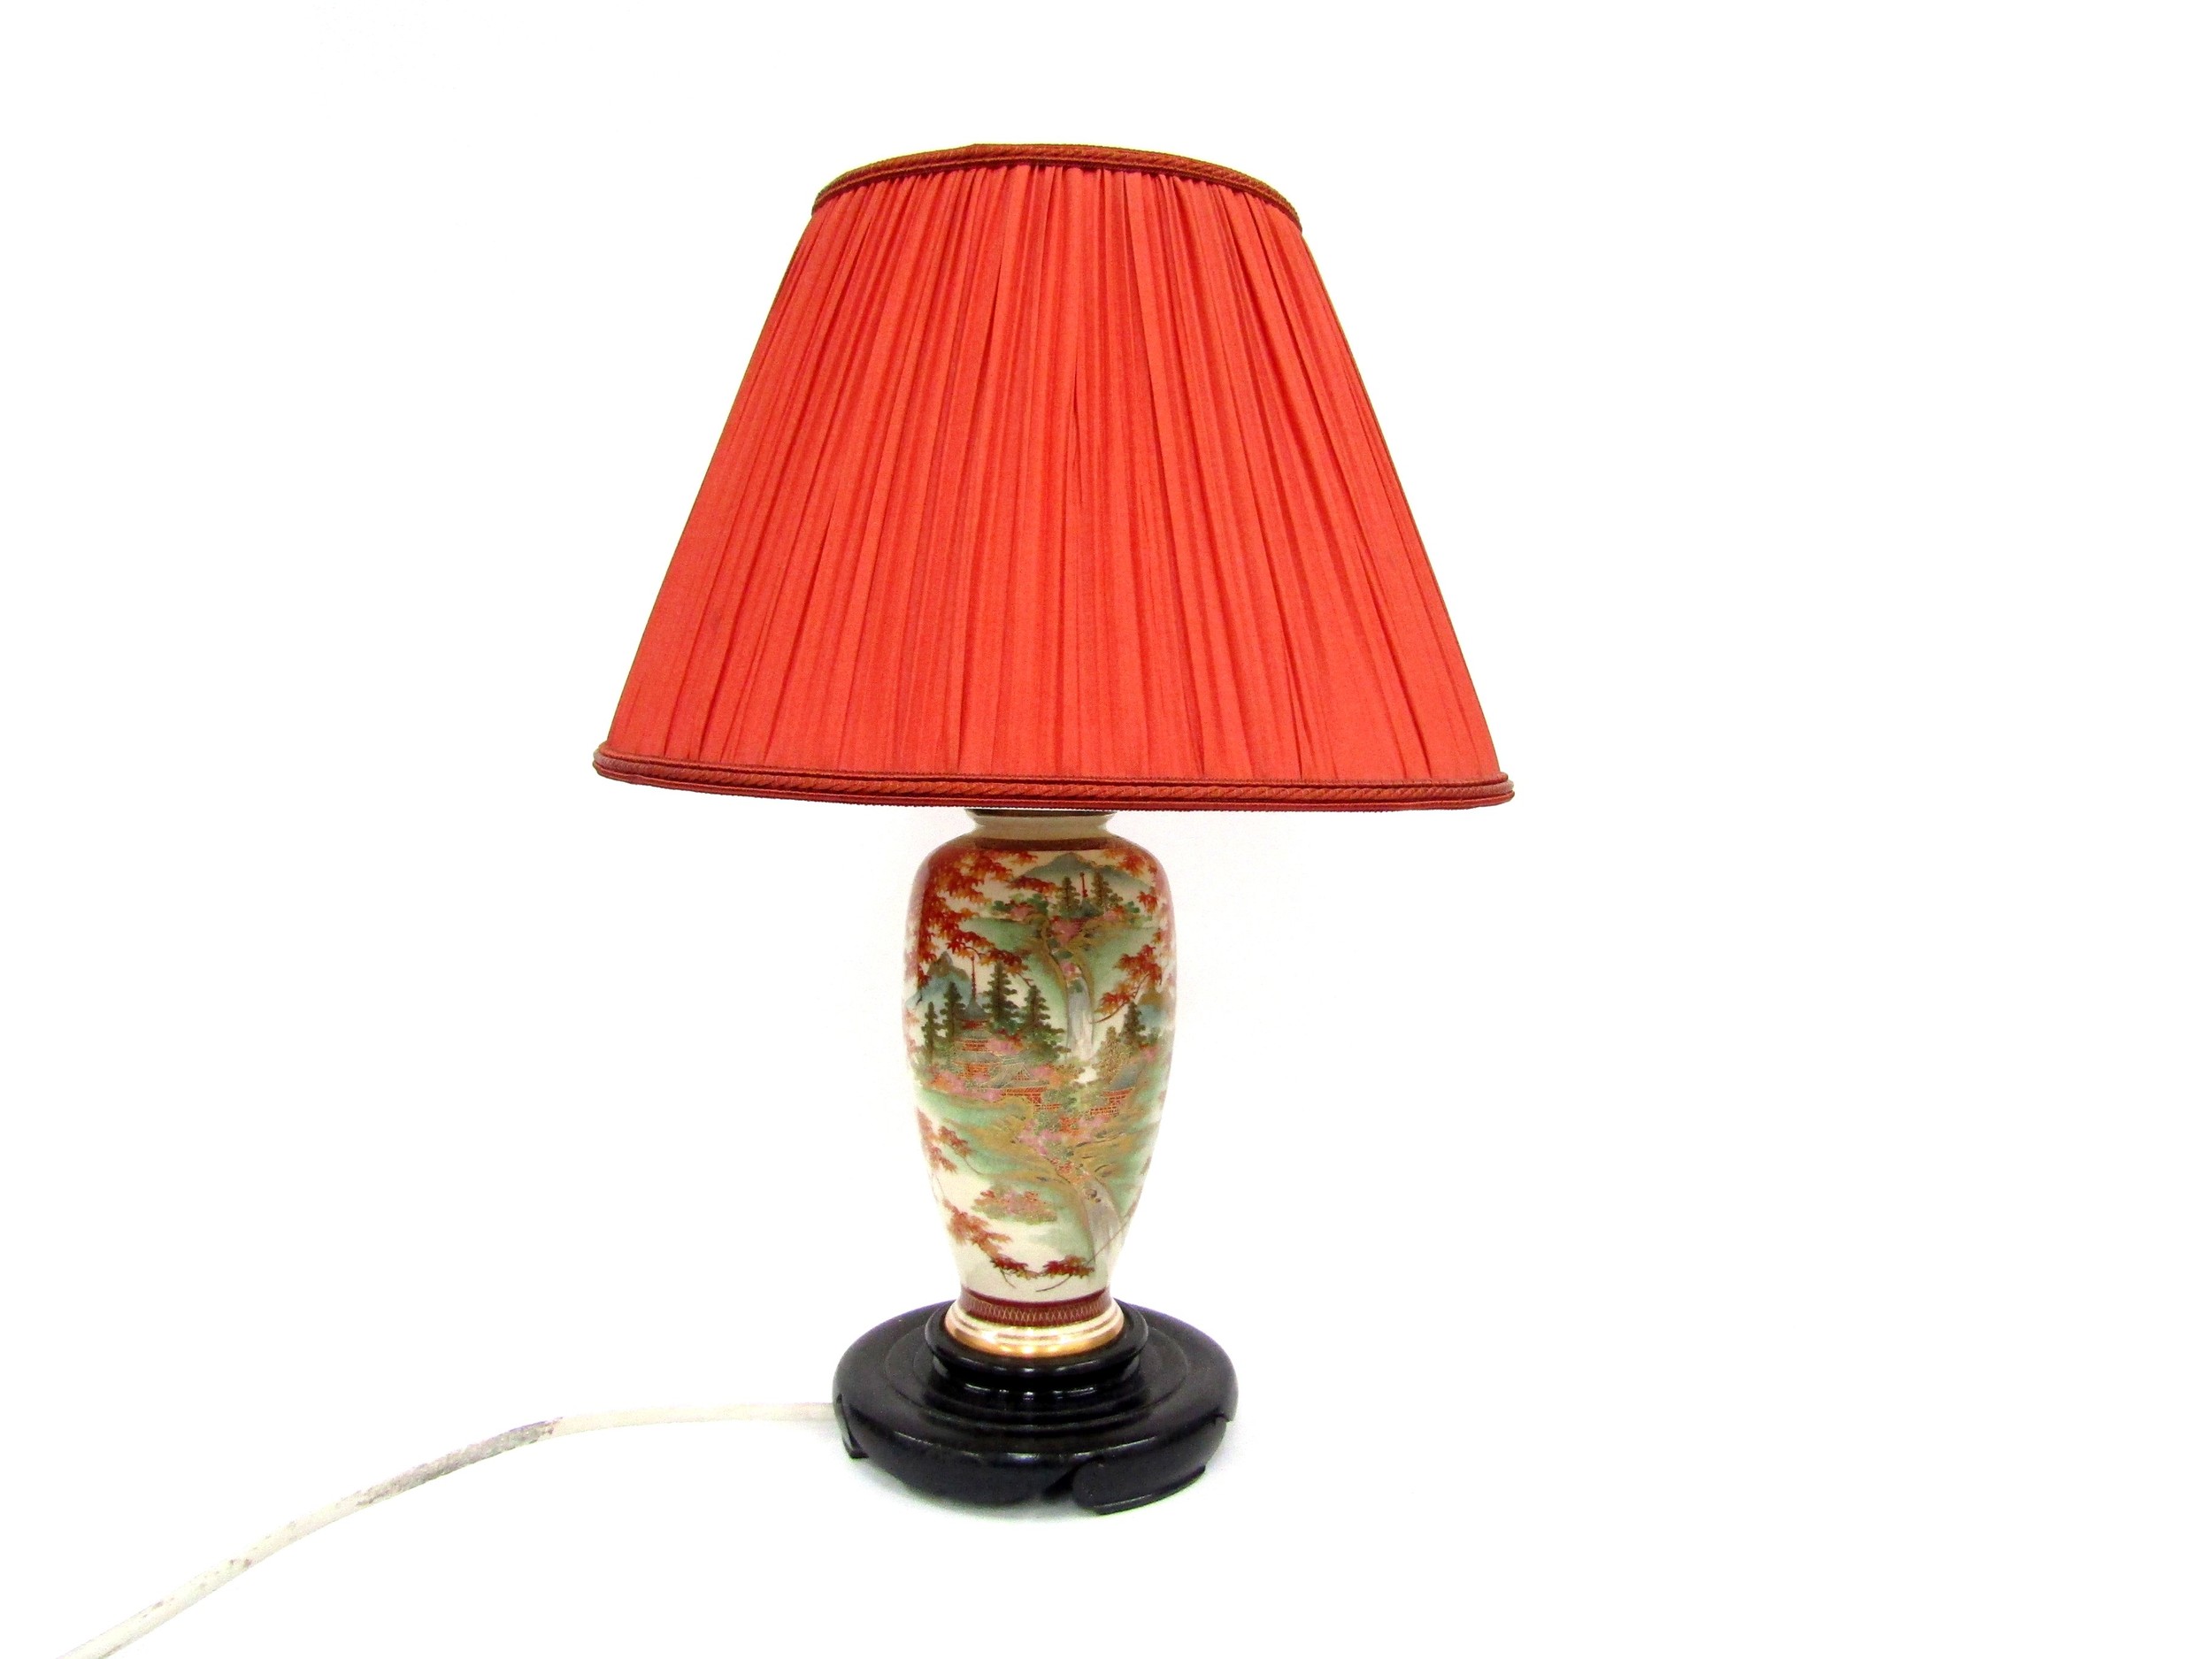 A decorative Japanese lamp with silk shade, 43cm tall with shade